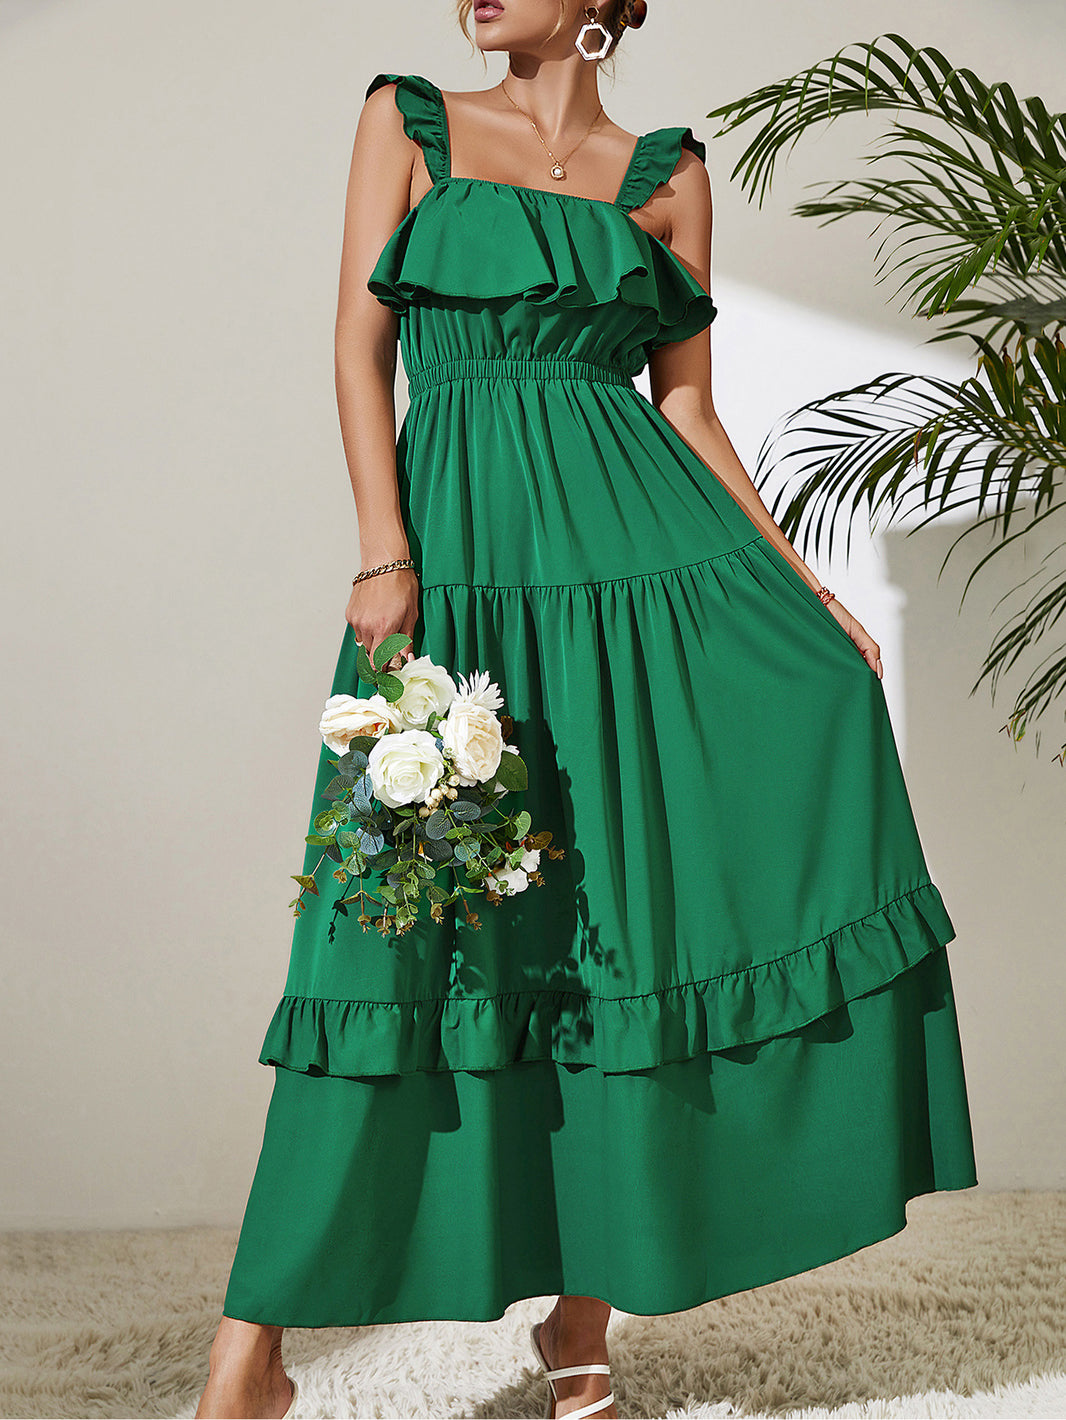 Dresses | Vintage Inspired Style | Couture For Every Body – Page 13 ...